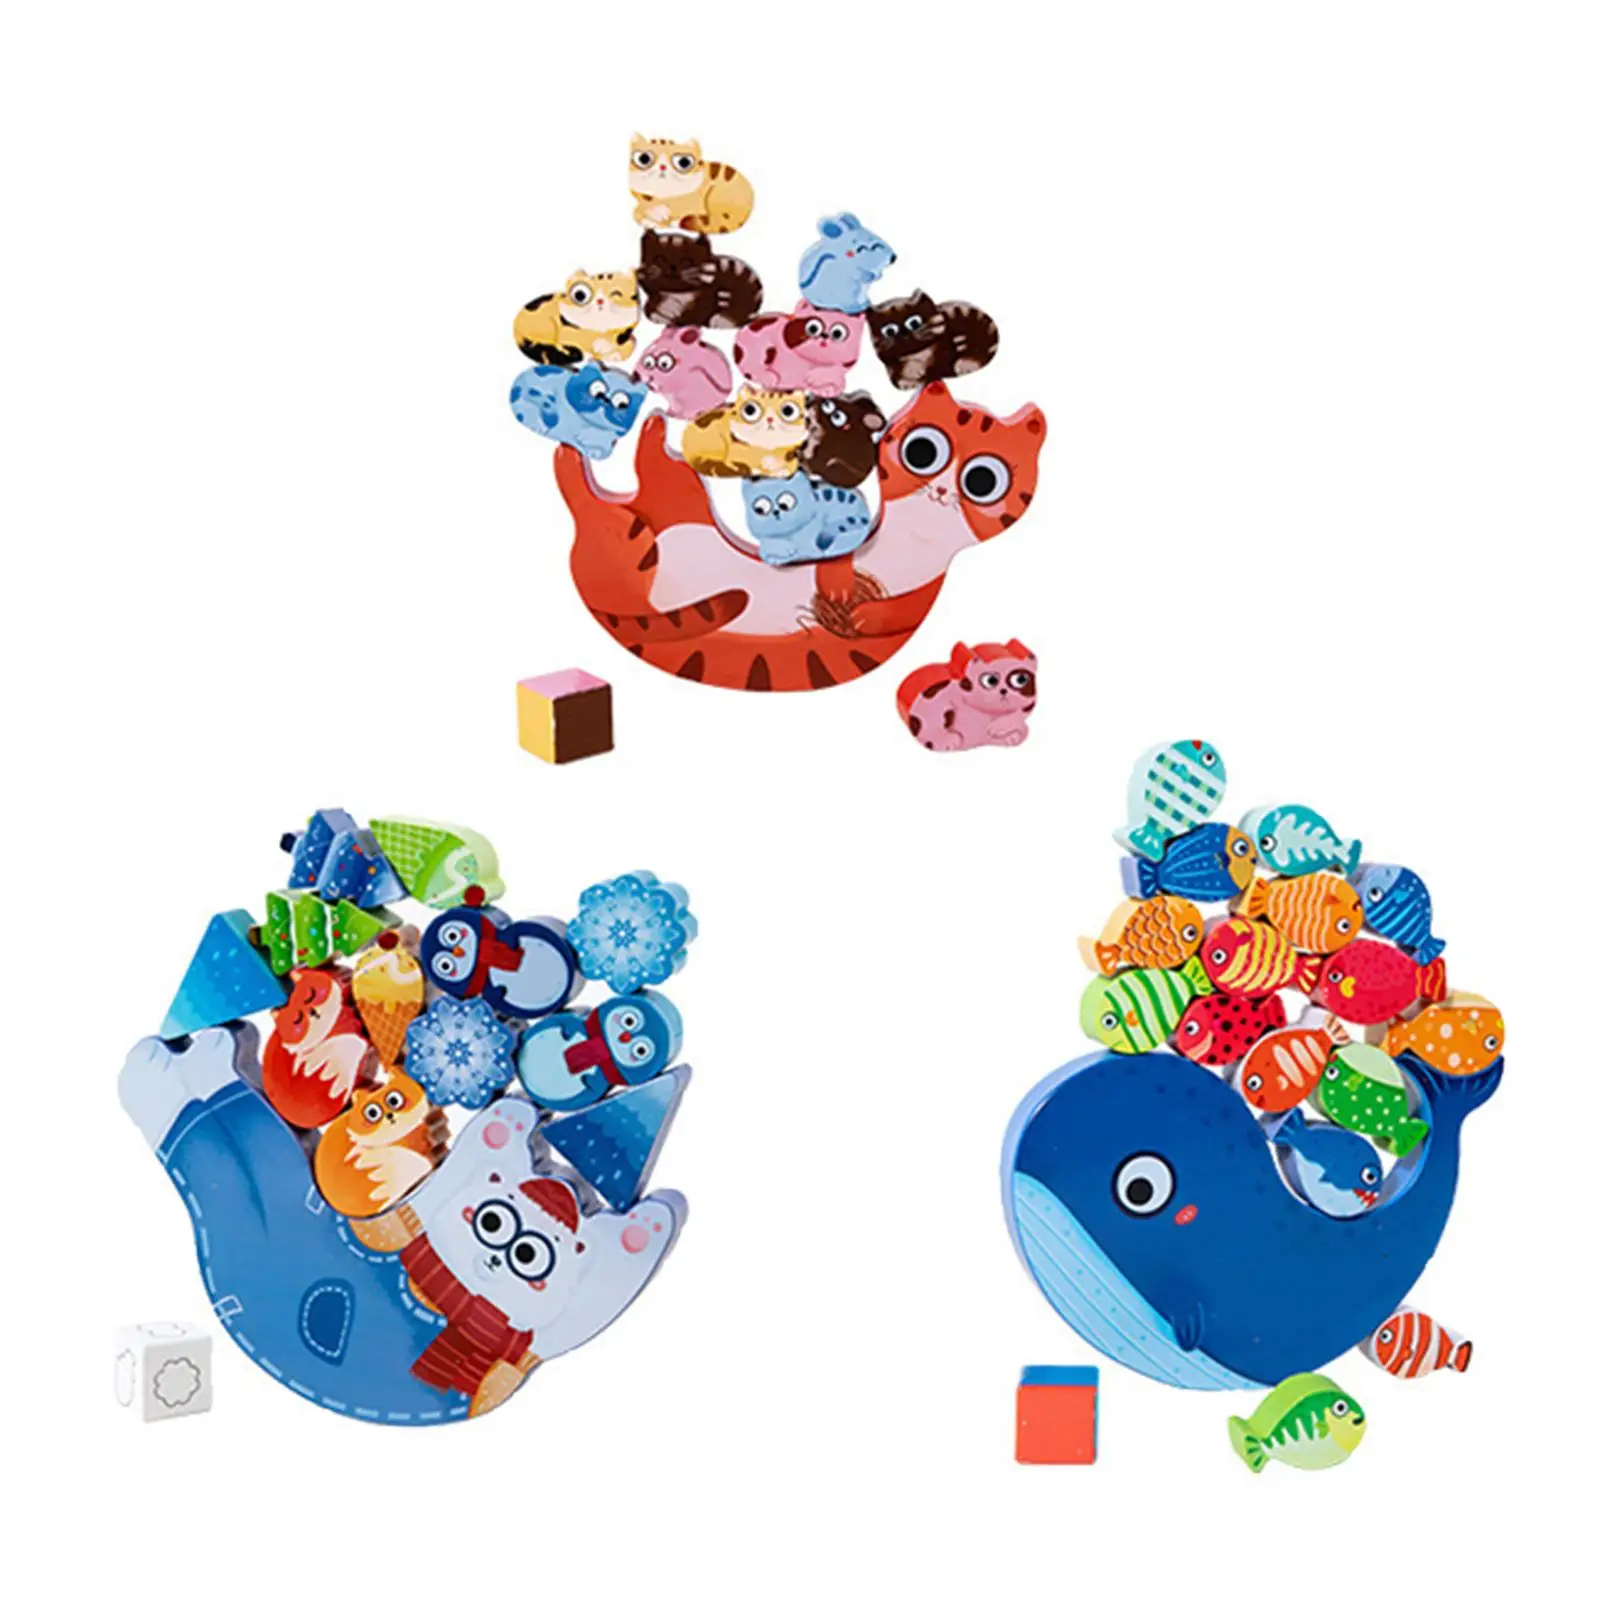 Montessori Educational Stacking Toys Stem Sensory Toys Puzzle Game for Children Kids Toddlers 1 2 3 4 5 Year Old Birthday Gift